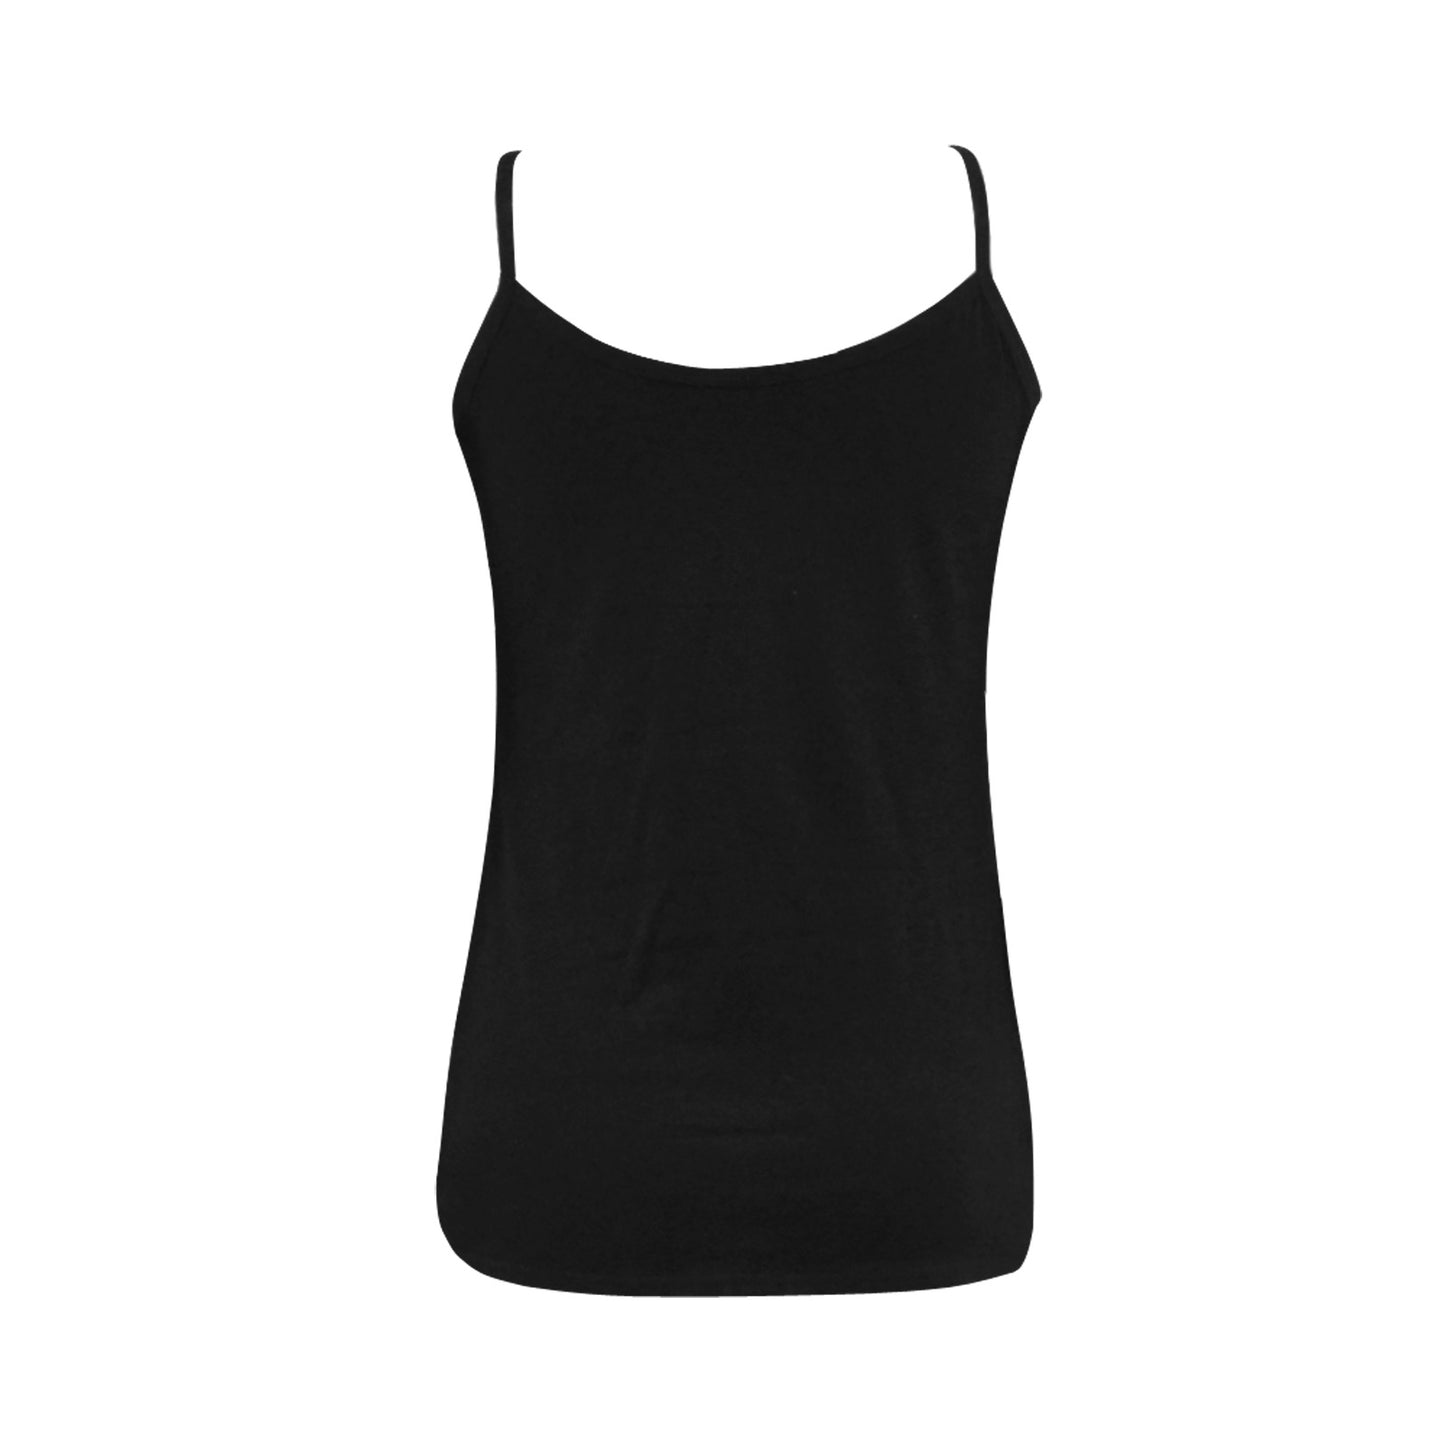 As Needed Woman's Tank Top